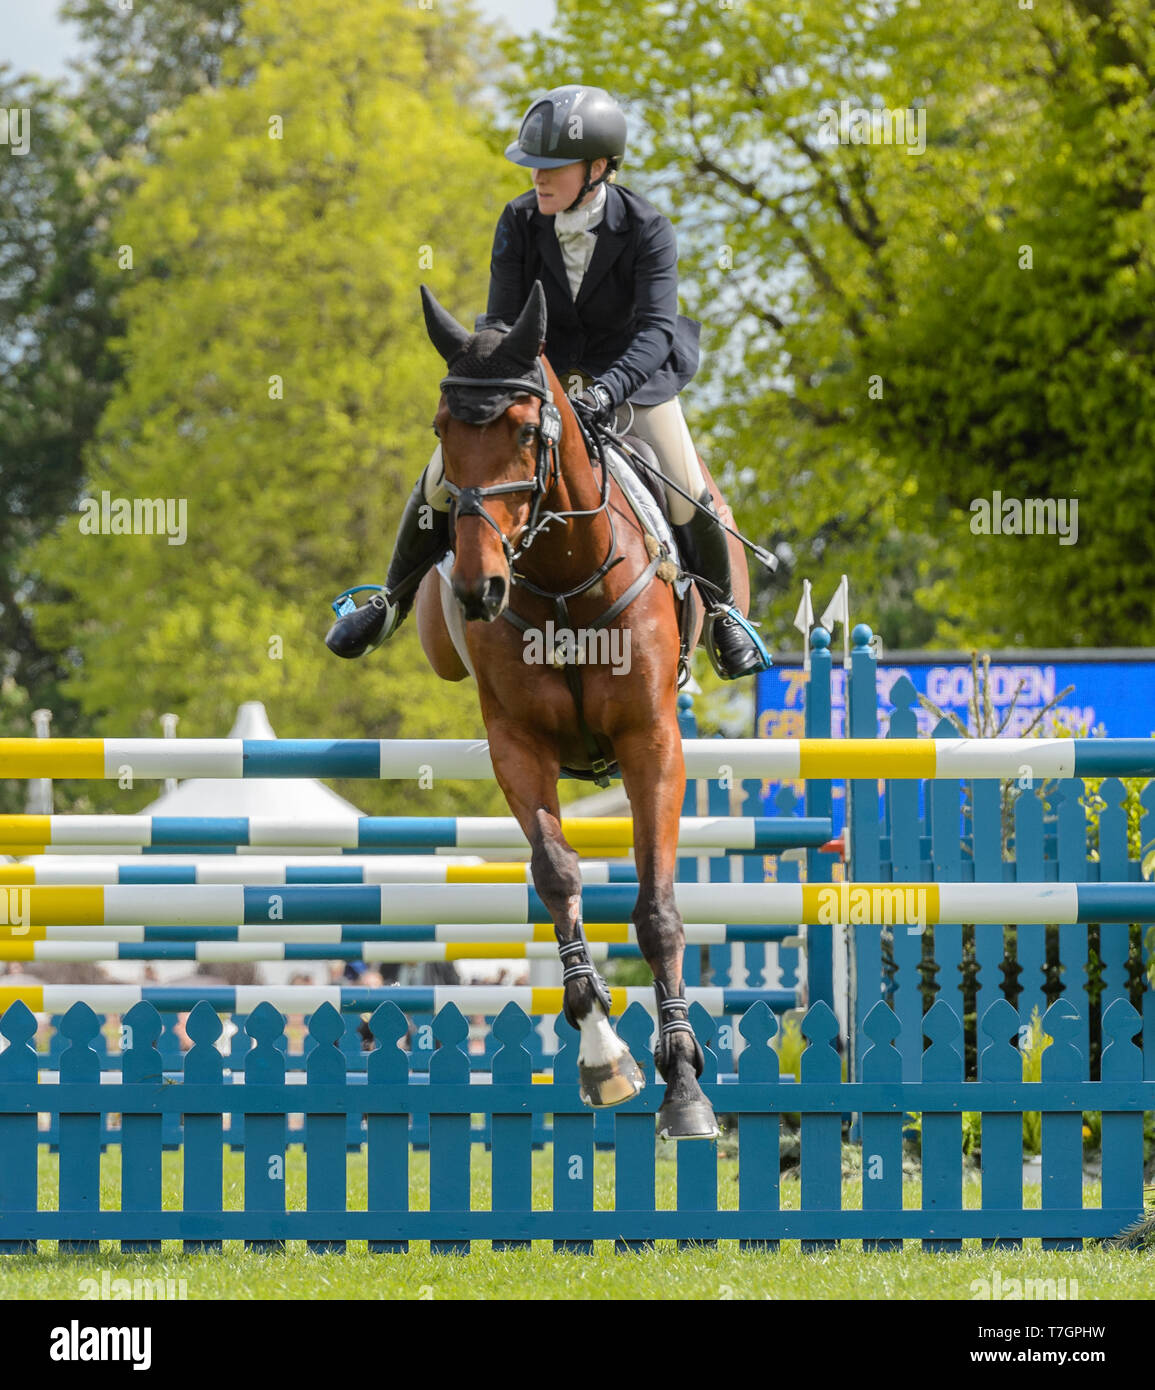 Imogen Murray and IVAR GOODEN during the showjumping phase, Mitsubishi Motors Badminton Horse Trials, Gloucestershire, 2019 Stock Photo